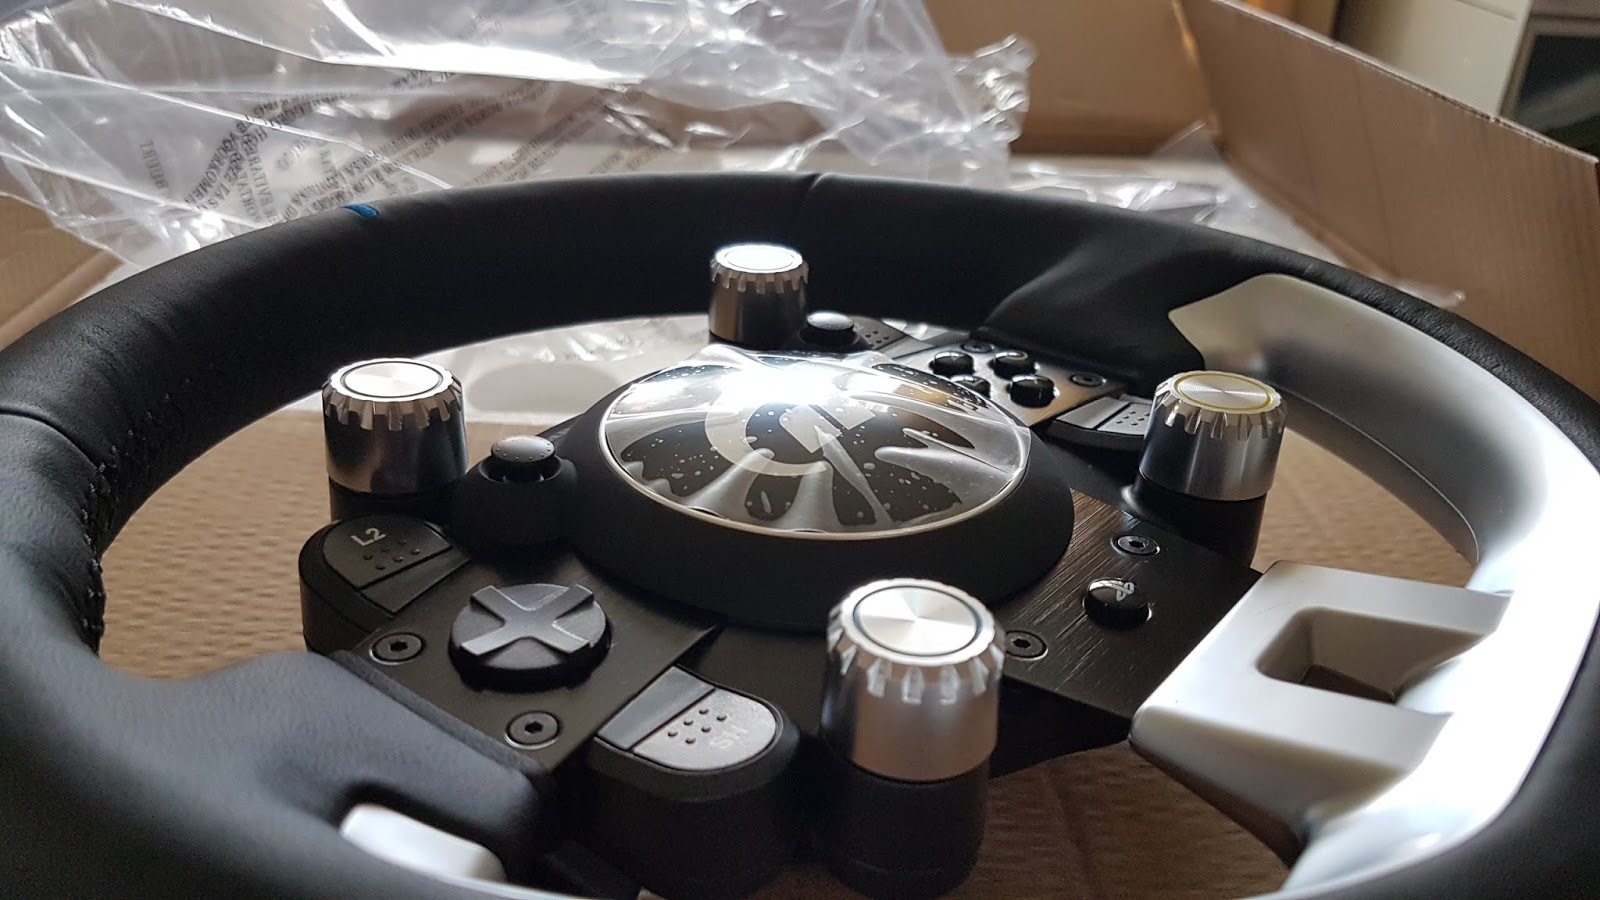 First Impressions on the Thrustmaster T150 + Unboxing 